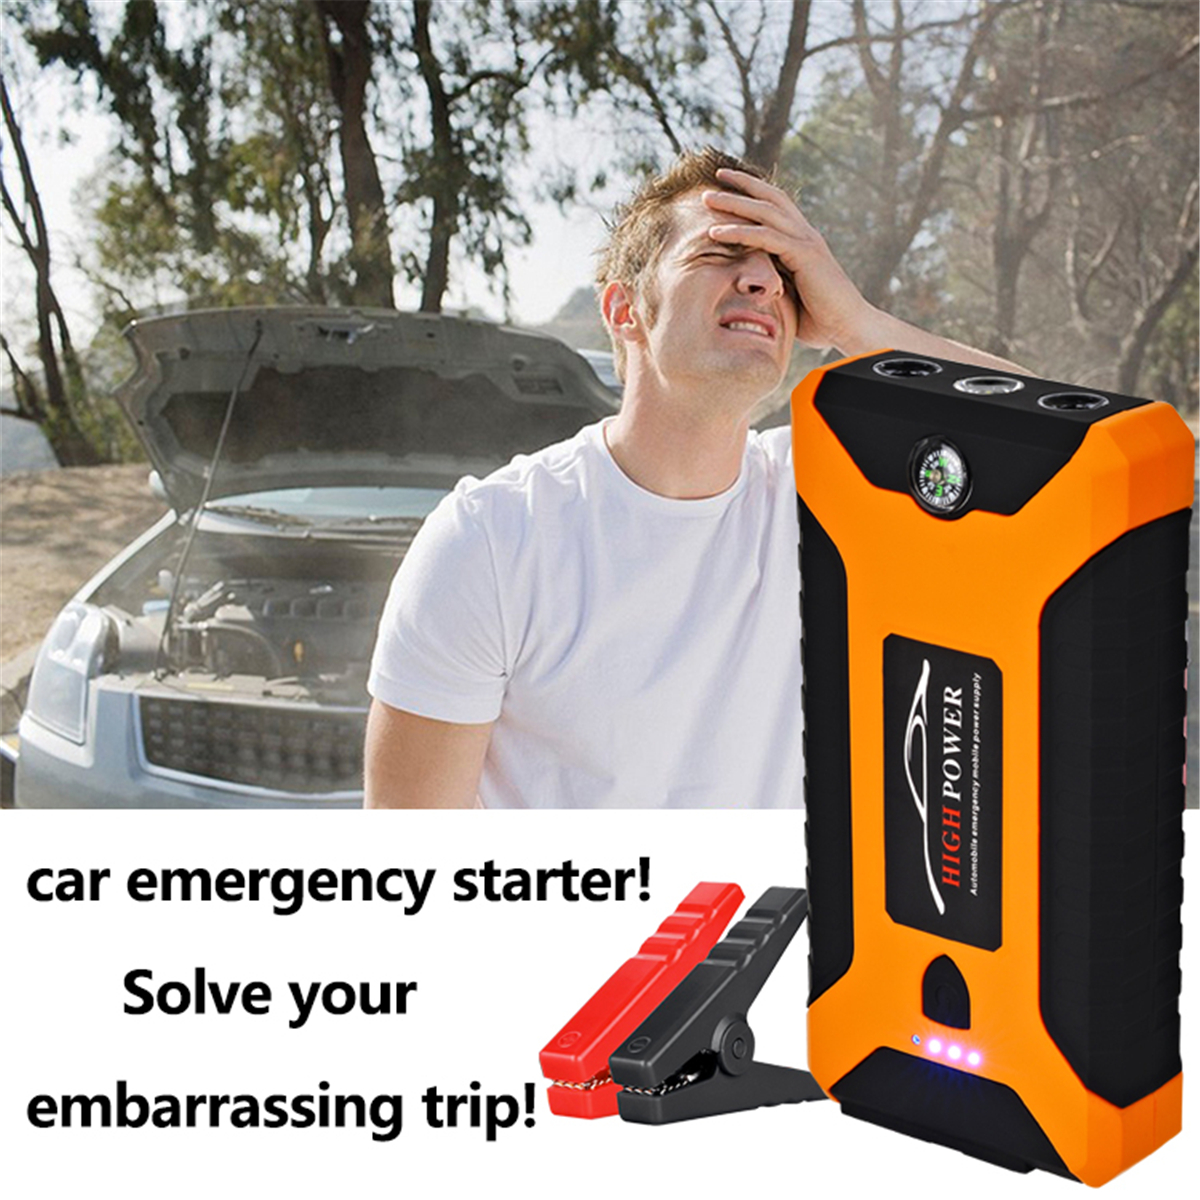 JX27-88000mAh-4USB-Car-Jump-Starter-Pack-Booster-Multifunction-Emergency-Power-Supply-Starter-Charge-1381251-3